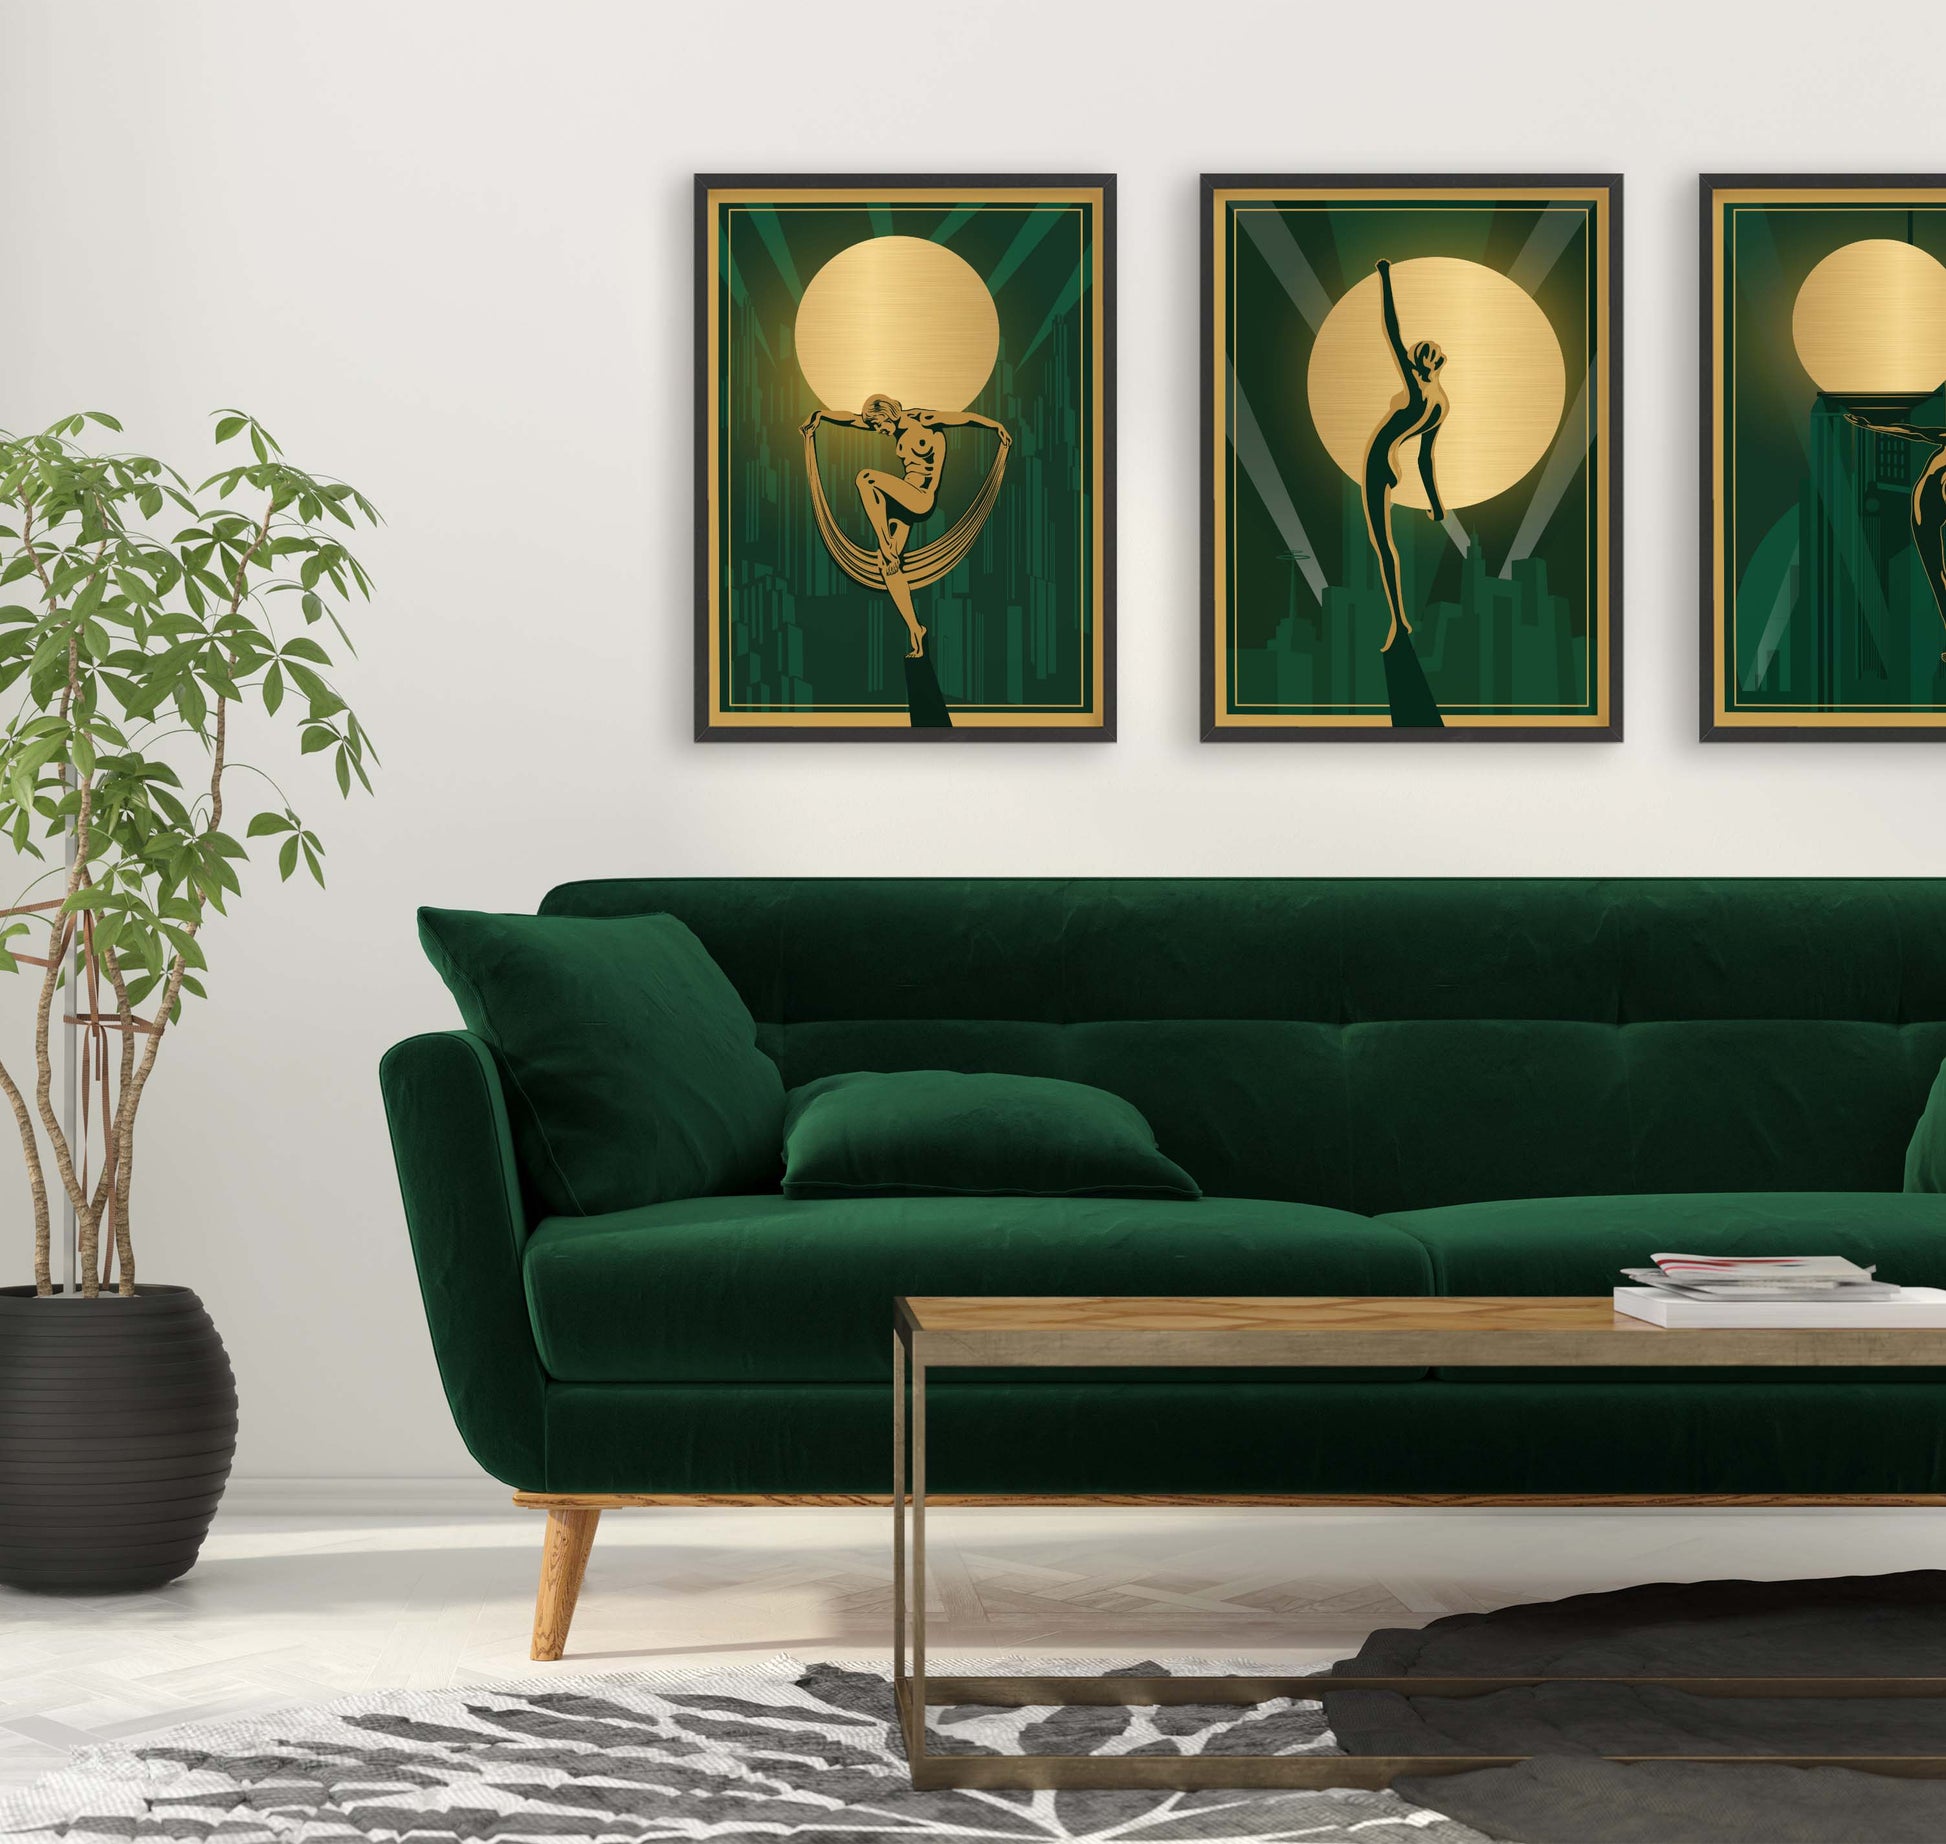 Green and gold set of art deco prints, set of 3 posters